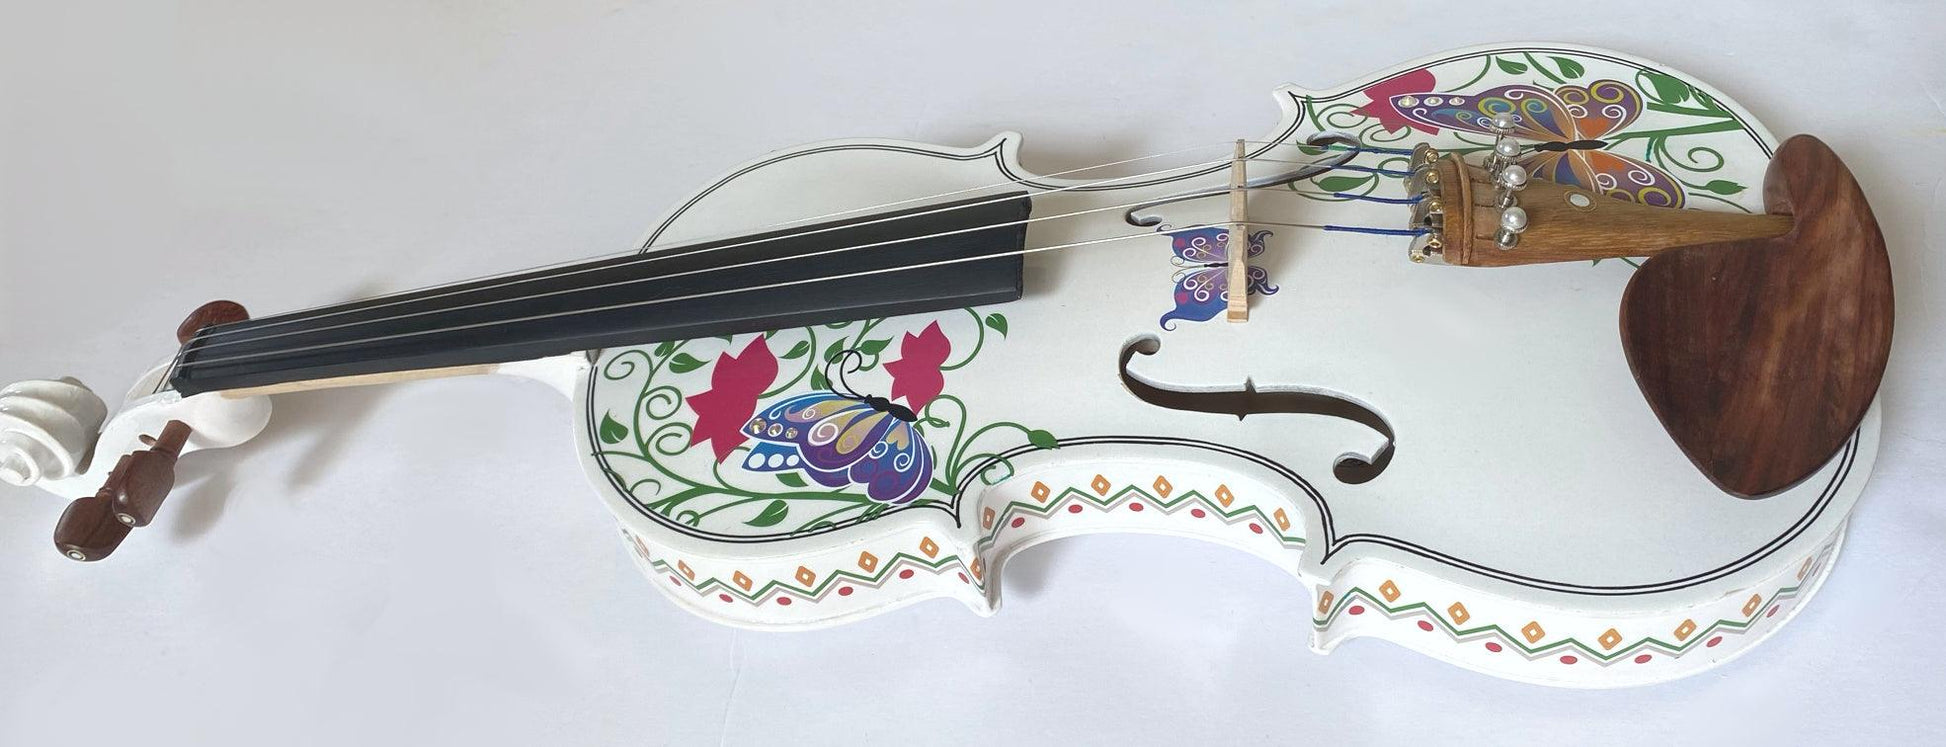 Rozanna's Violins Butterfly Dream II White Violin Outfit w/ Greco sides - Rozanna's Violins